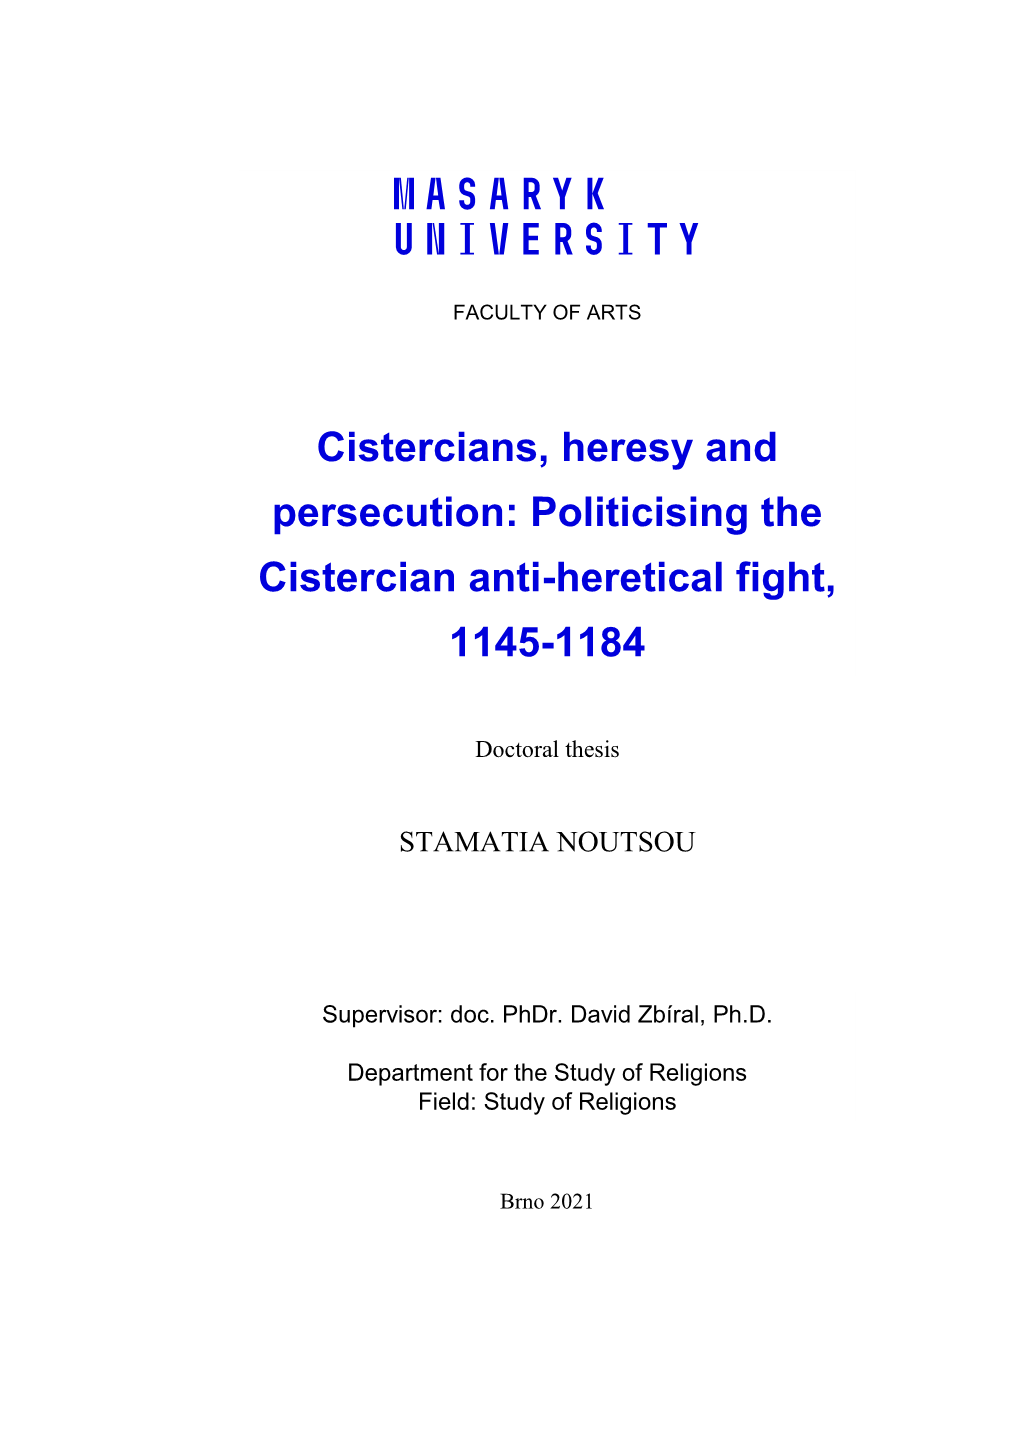 Cistercians, Heresy and Persecution: Politicising the Cistercian Anti-Heretical Fight, 1145-1184